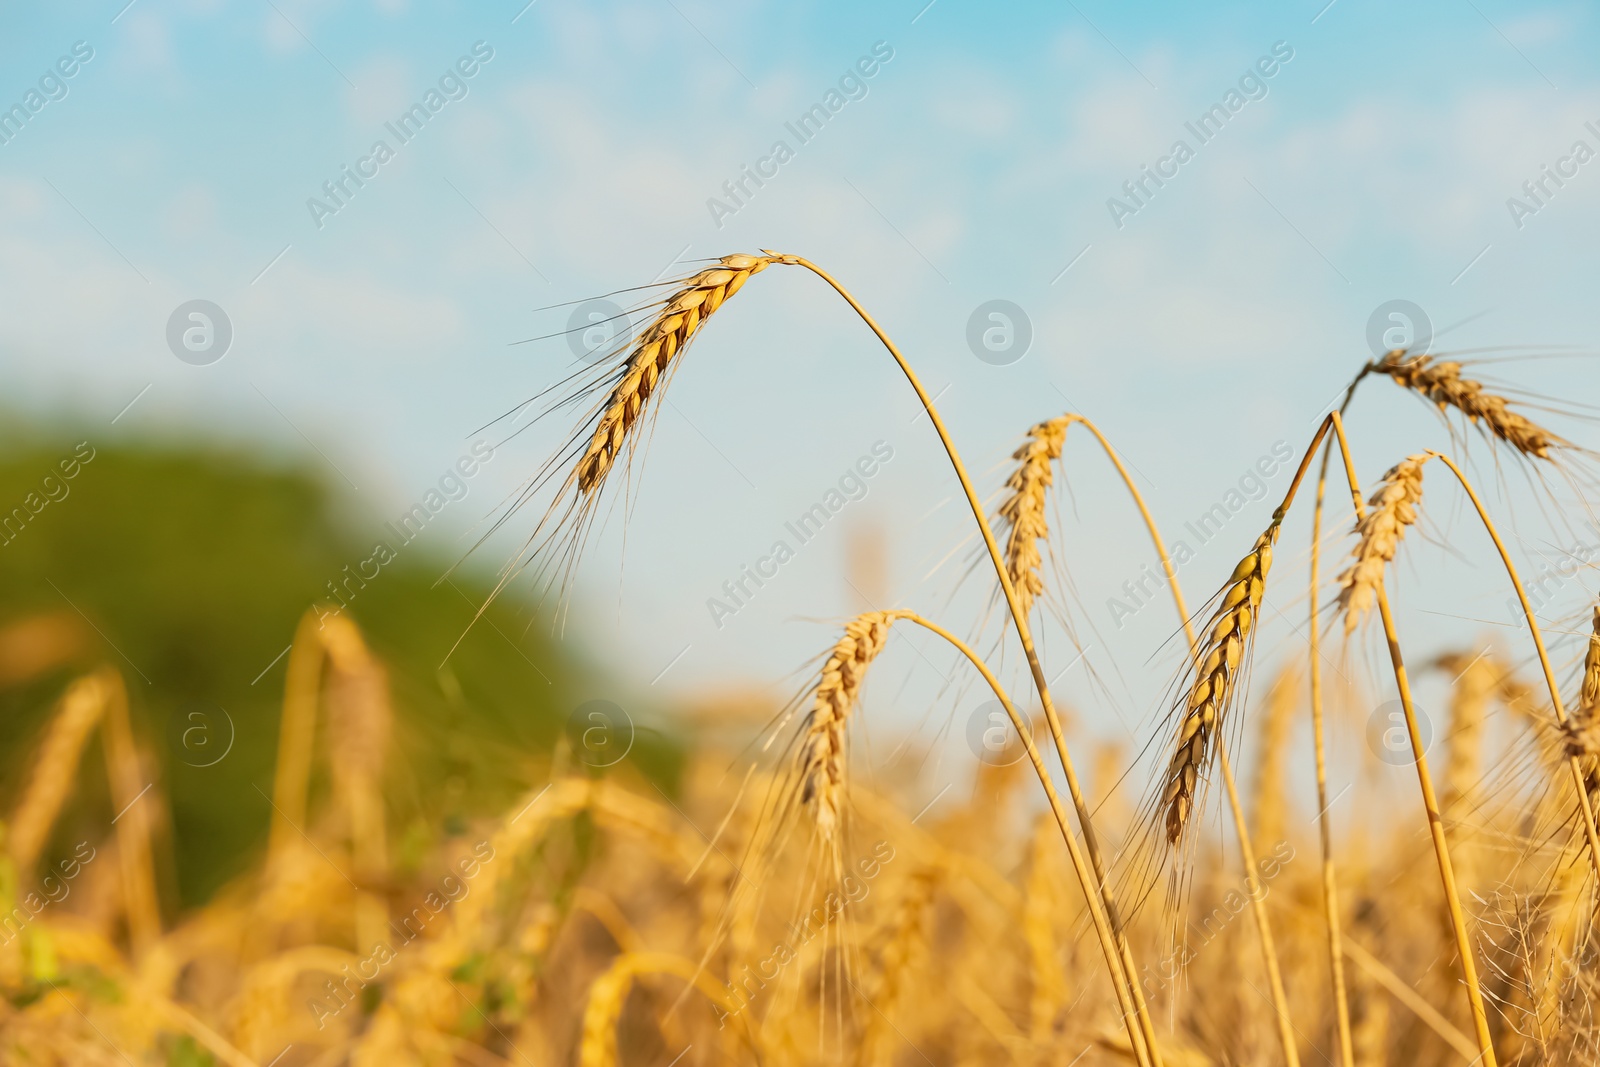 Photo of Golden ripe wheat spikelets in field, closeup